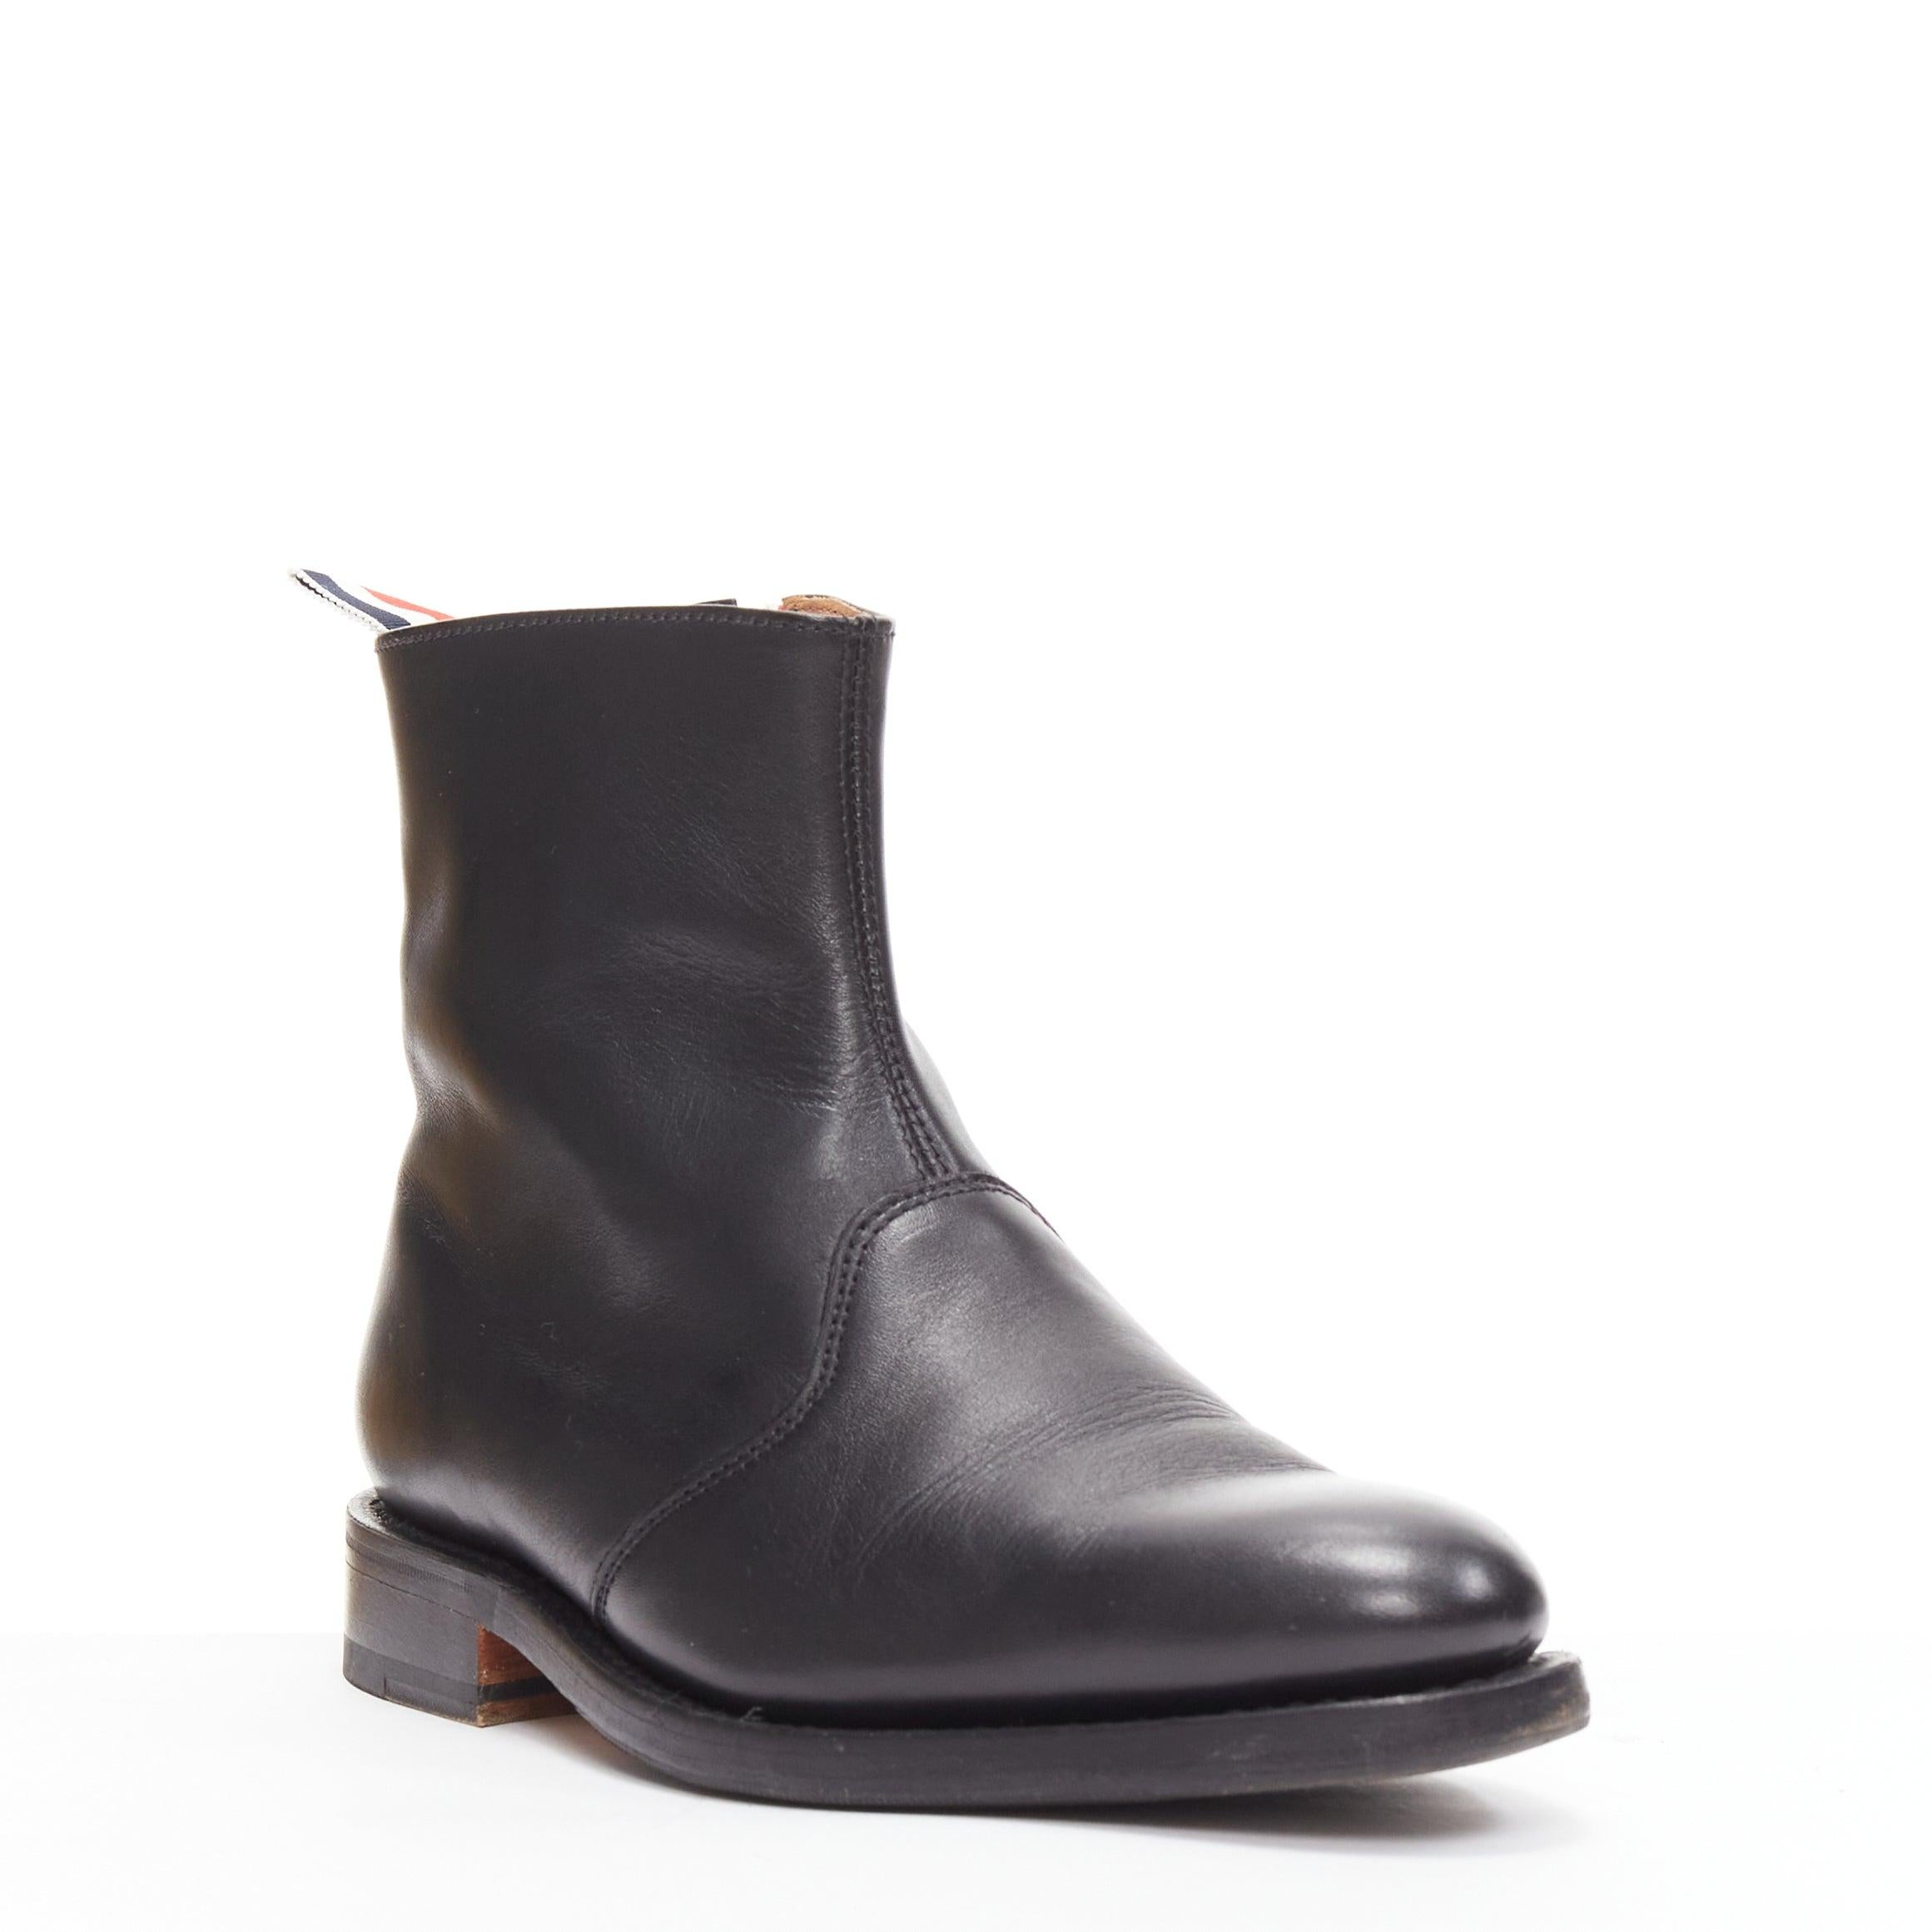 THOM BROWNE black leather red blue tab minimal zip ankle boots EU38
Reference: LNKO/A02293
Brand: Thom Browne
Designer: Thom Browne
Material: Leather
Color: Black, Multicolour
Pattern: Striped
Closure: Zip
Lining: Nude Leather
Extra Details: